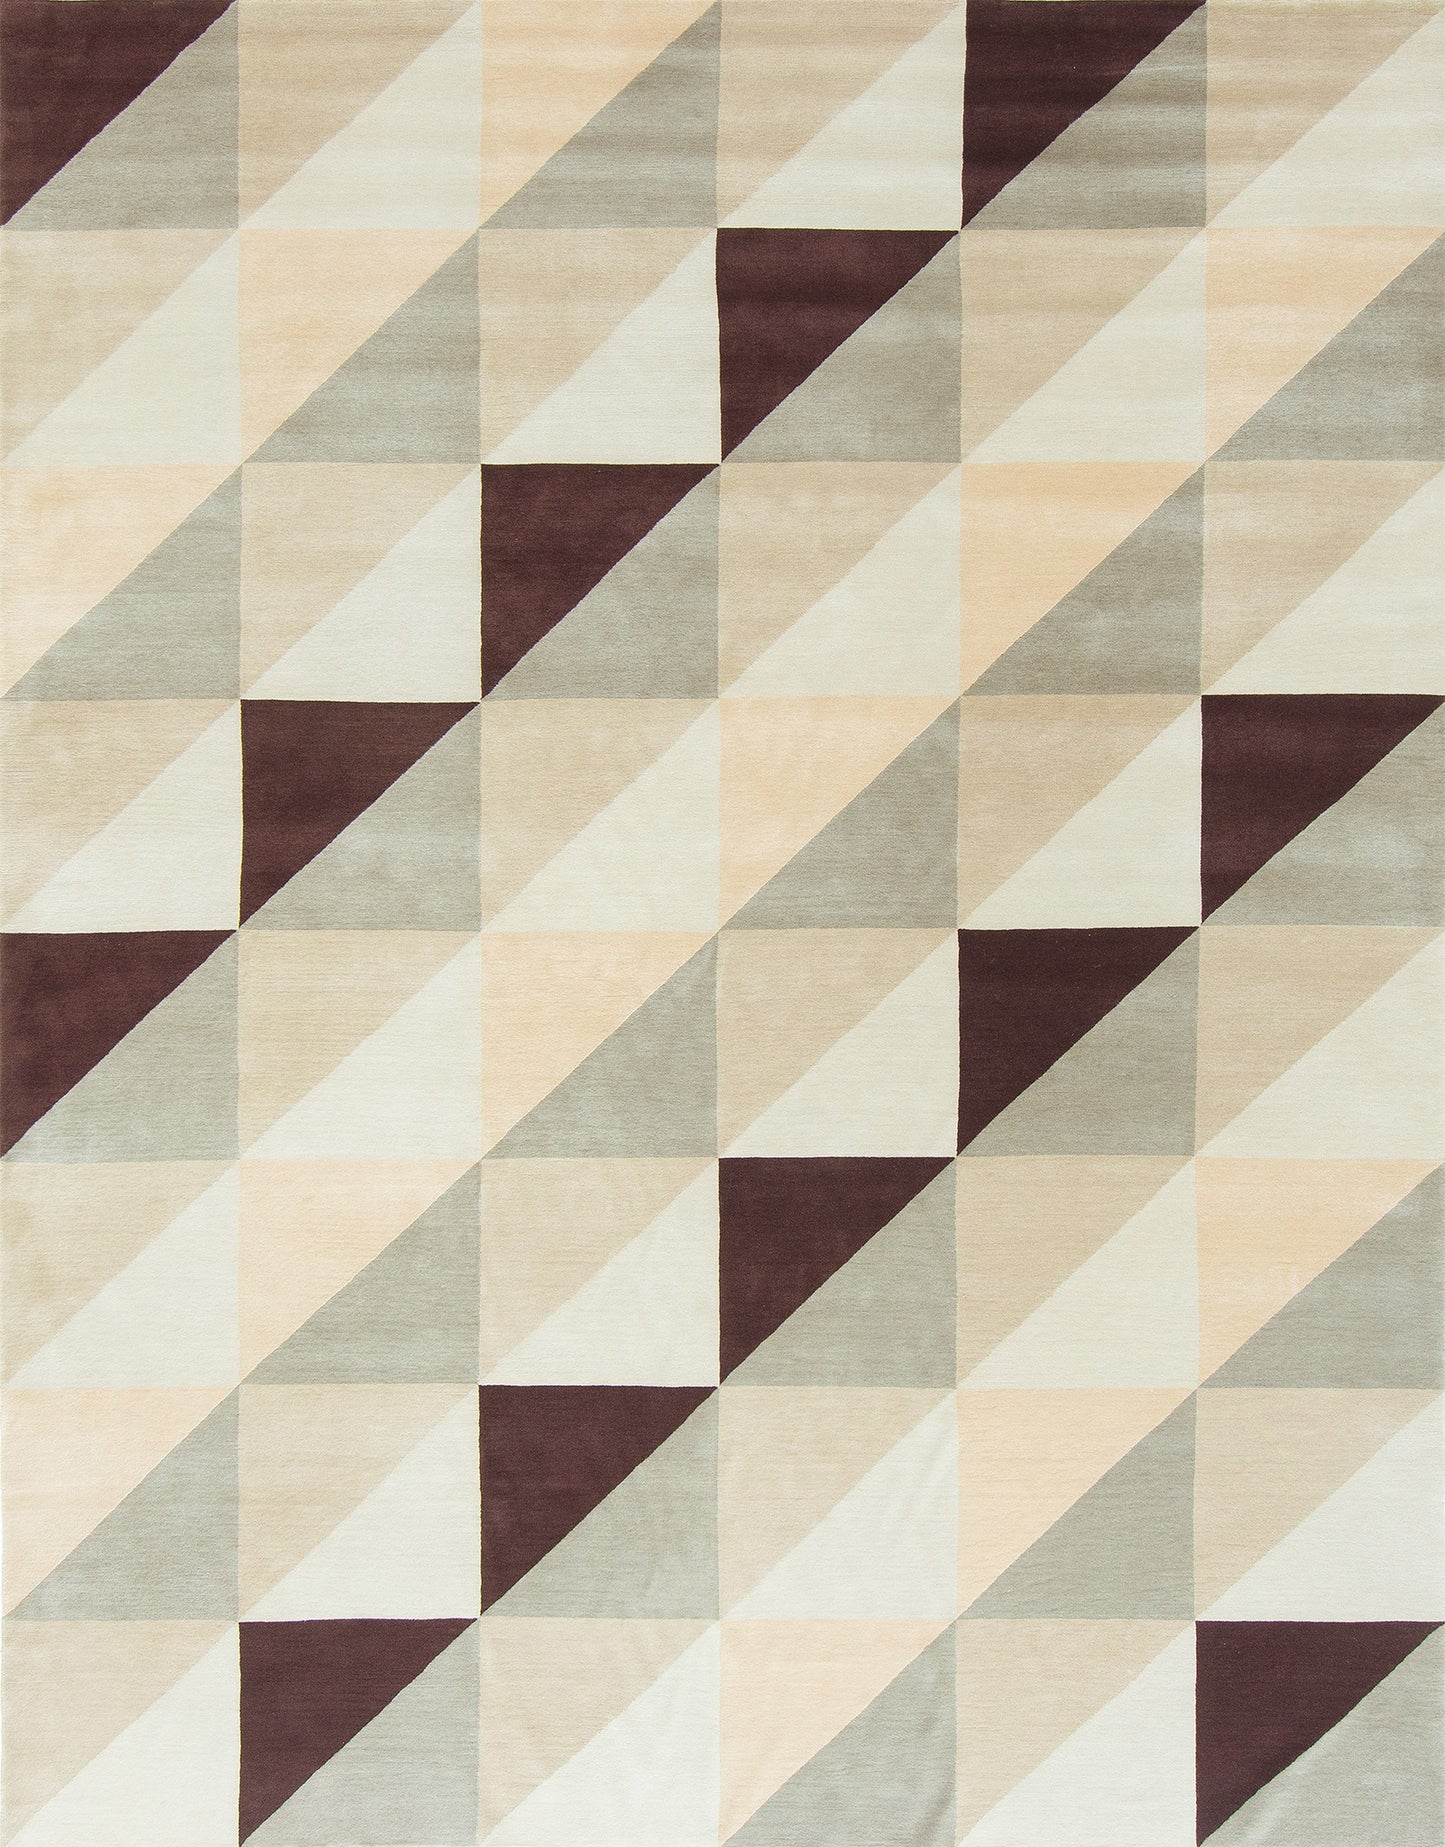 Modern Rug Image 3941 Cicchetti, Baci Collection by Citizen Artist